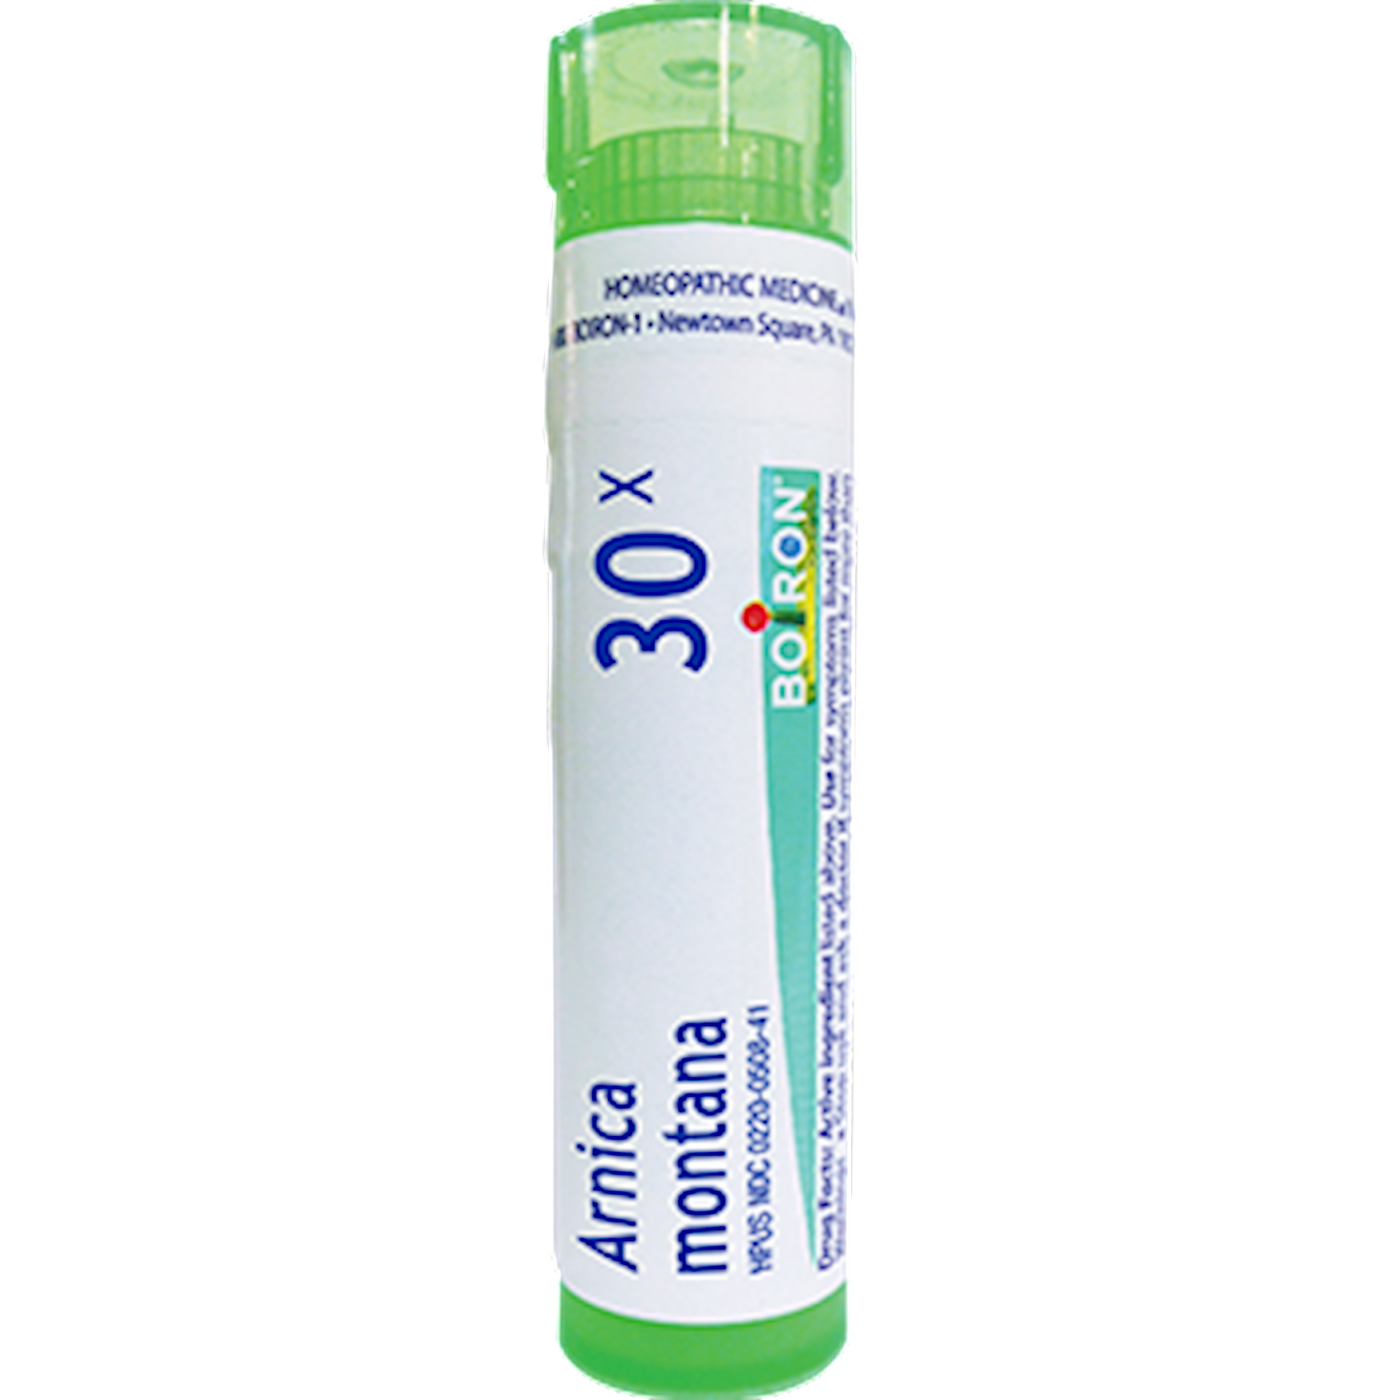 Arnica montana 30X 80 plts Curated Wellness